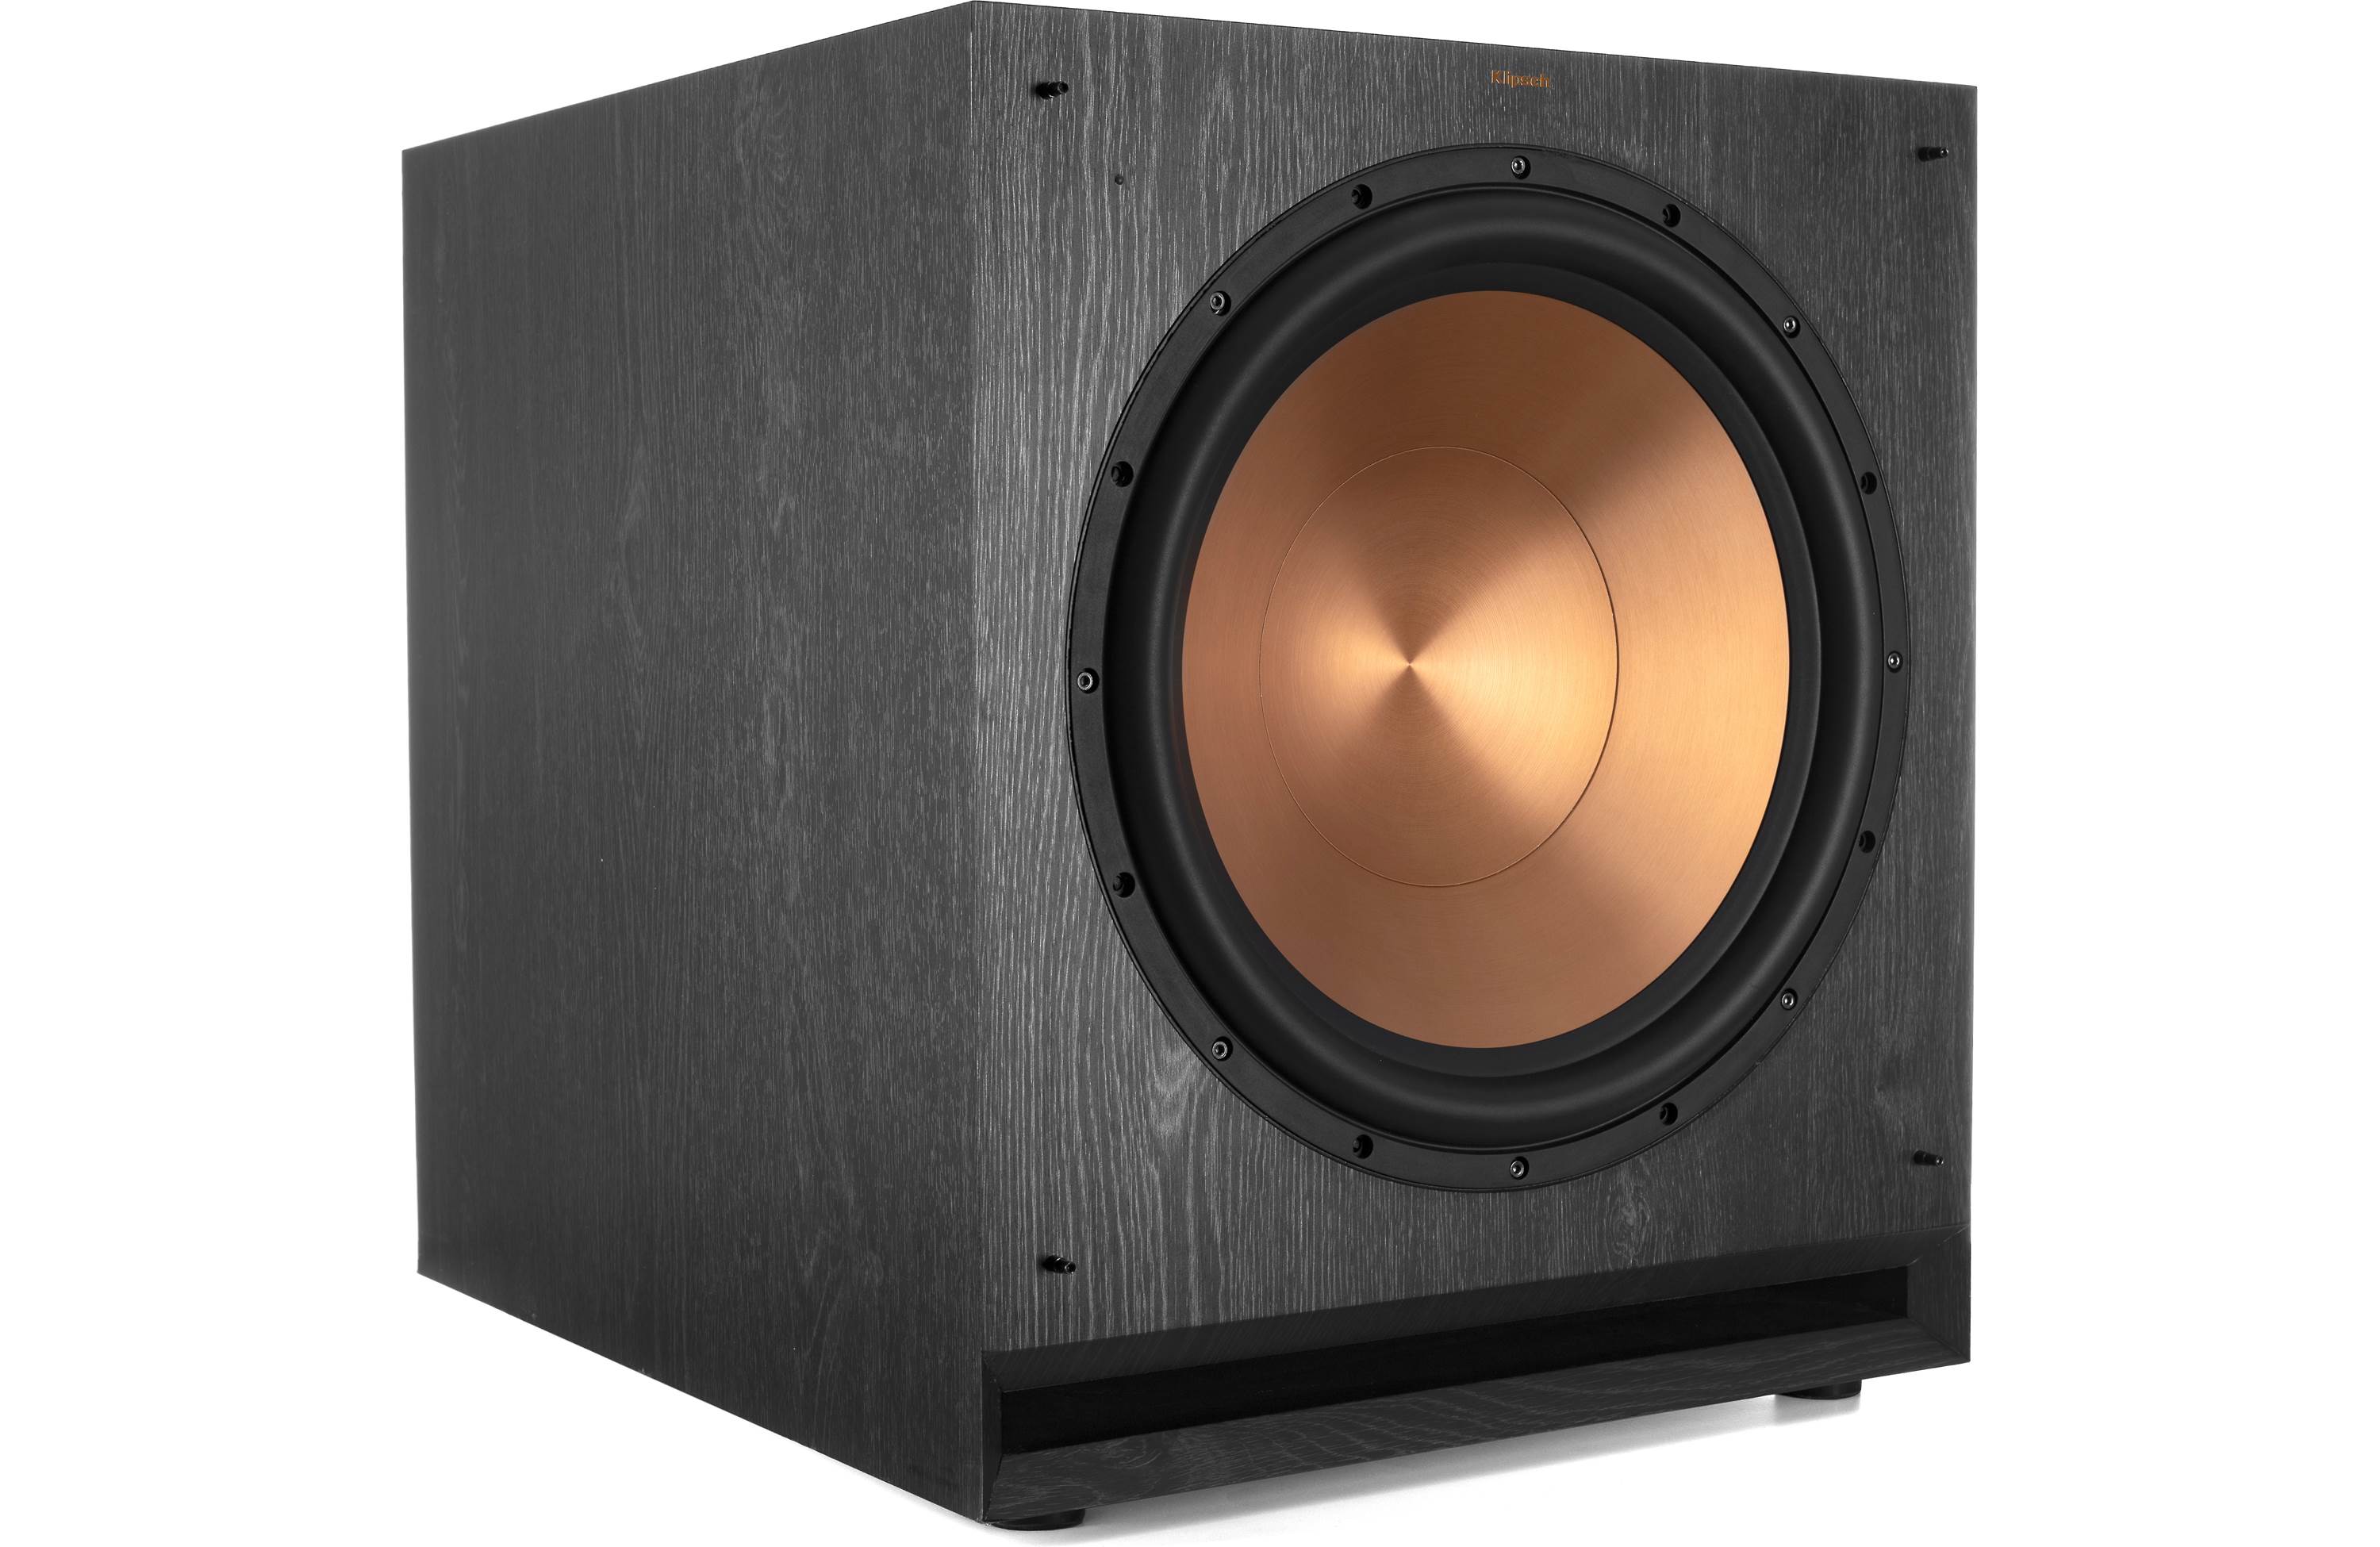 Get a powerful sub at a palatable price with this super sale on a 15" Klipsch that includes free shipping. g714SPL150 F